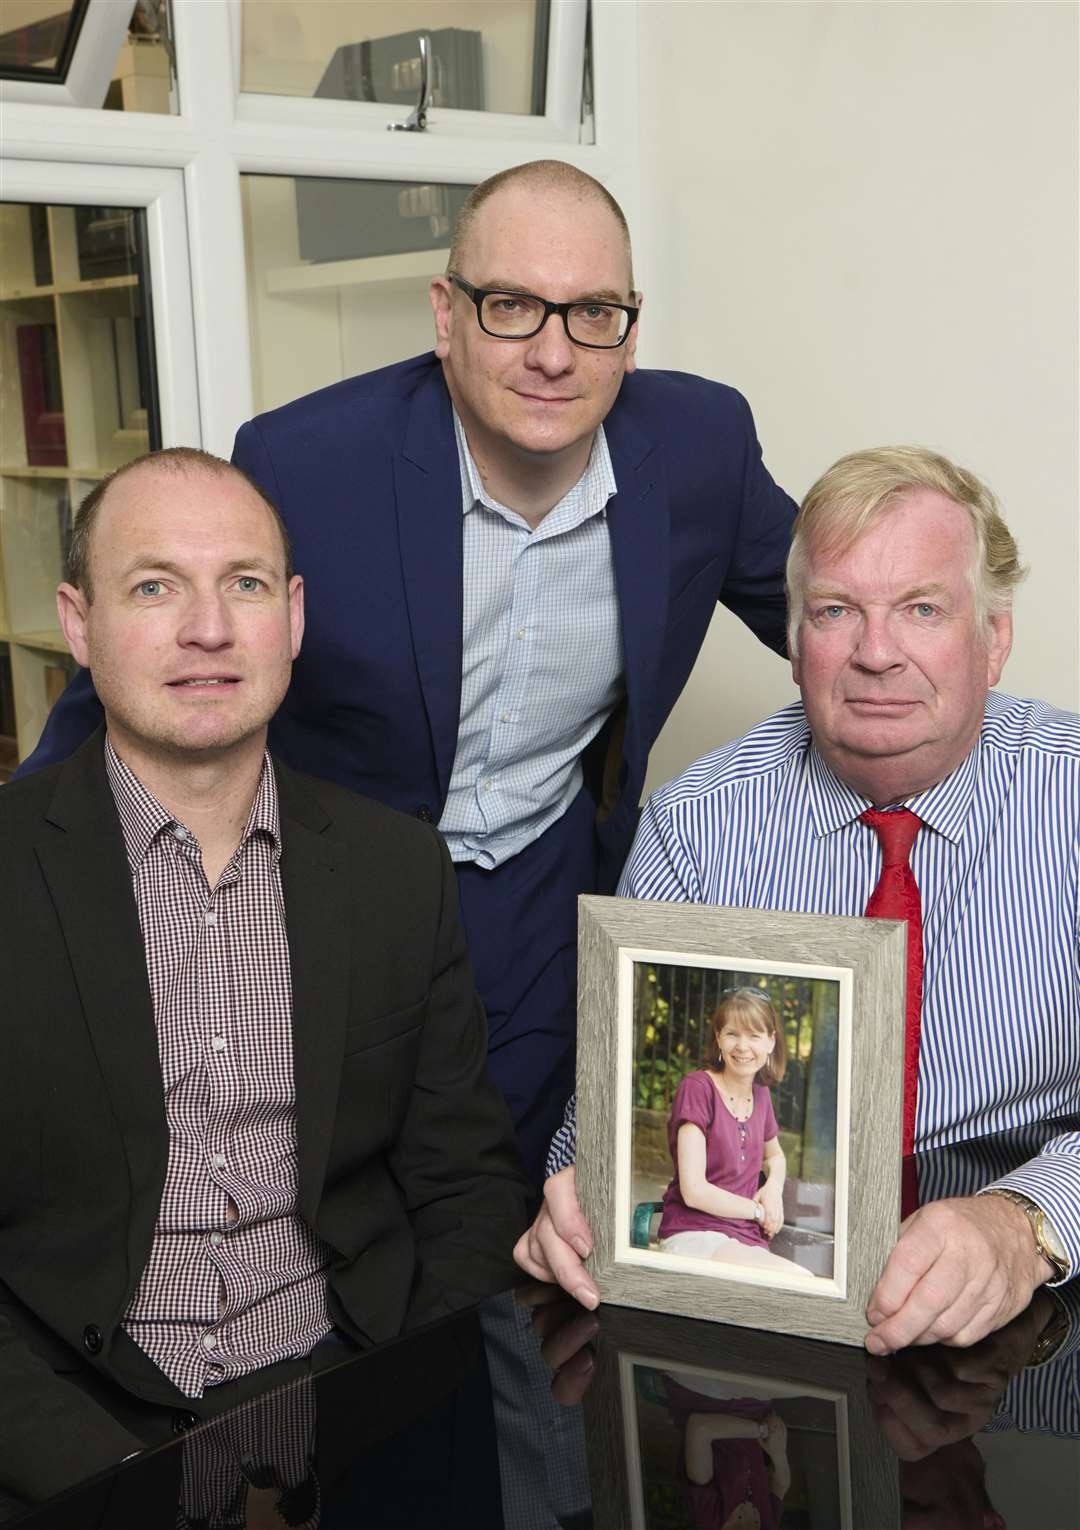 From left: Scott, Chris and David Dowling with a photograph of Jennifer.